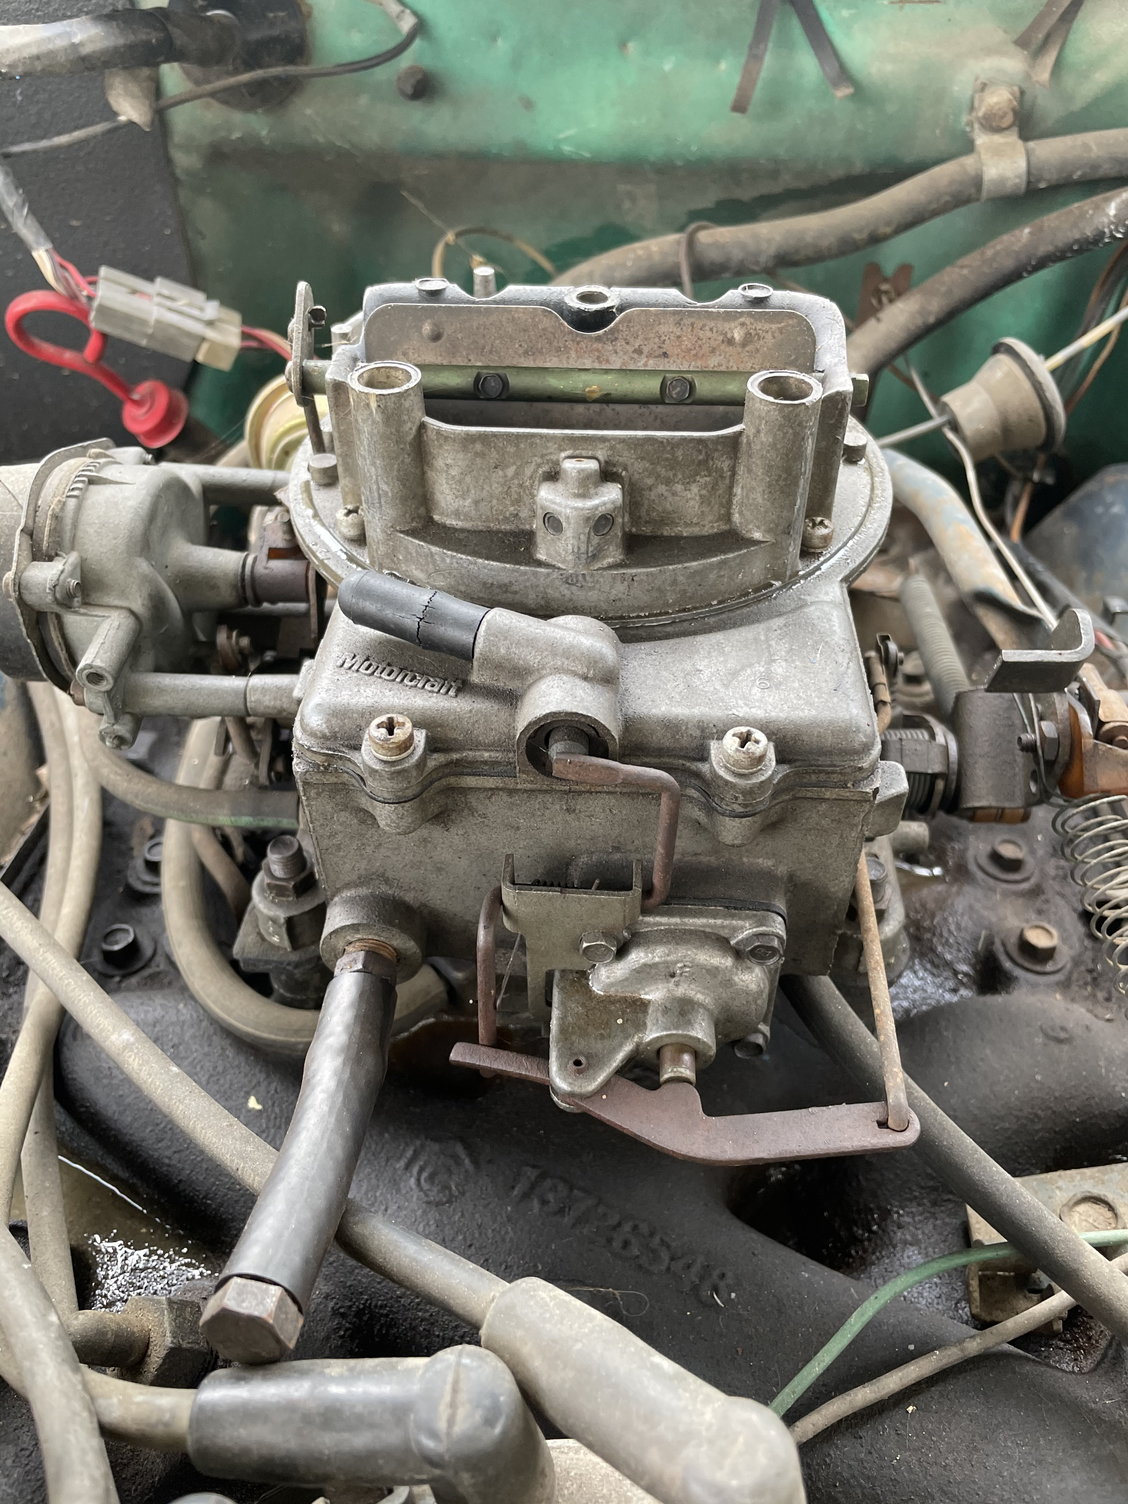 Help identifying carb and rebuild kit - Ford Truck Enthusiasts Forums